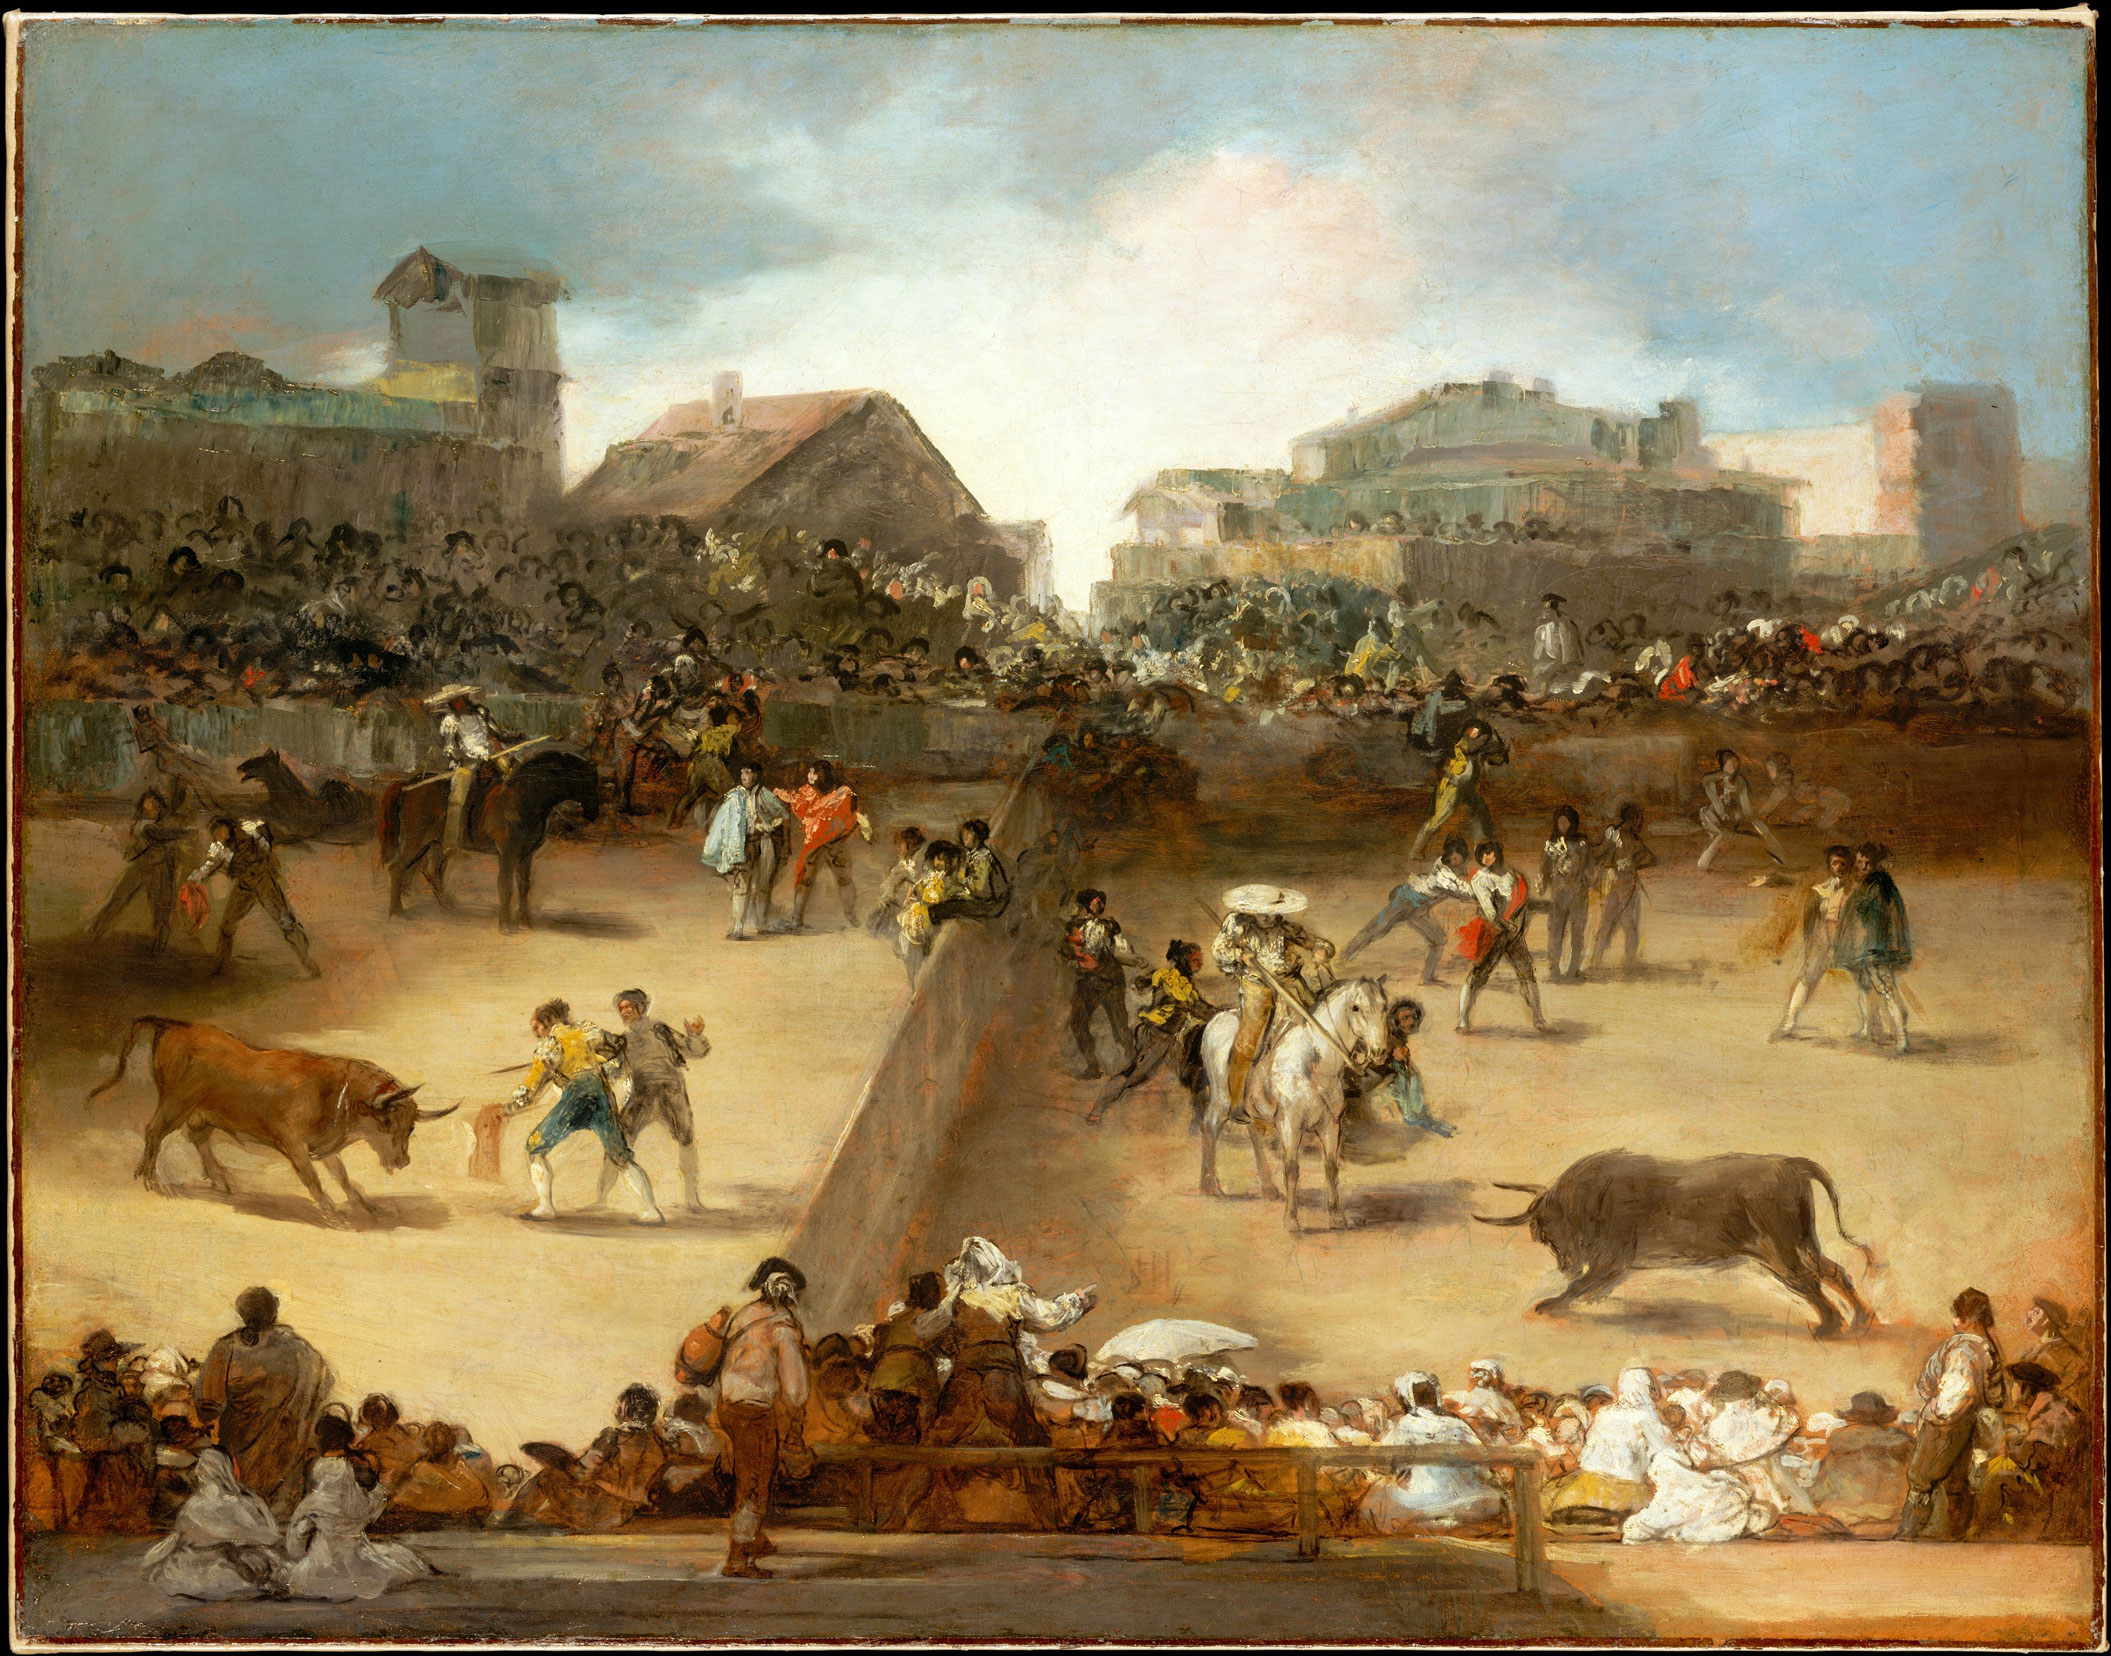 Spain's 4 most famous Artists - Goya, Painting of a Bullfight 